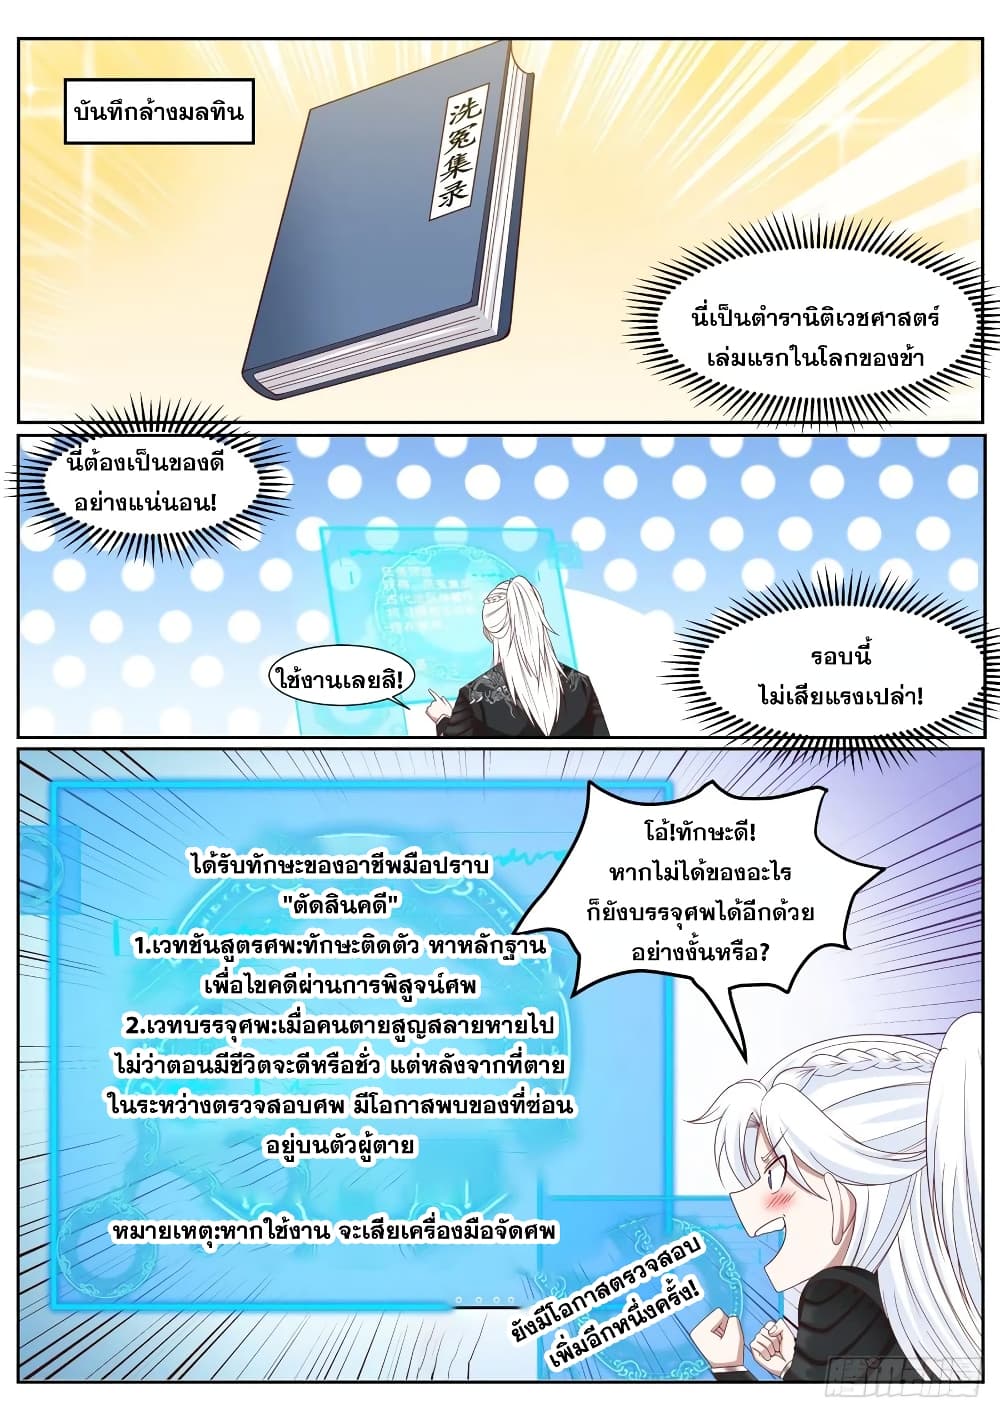 EXP Absorption System ตอนที่ 2 (6)